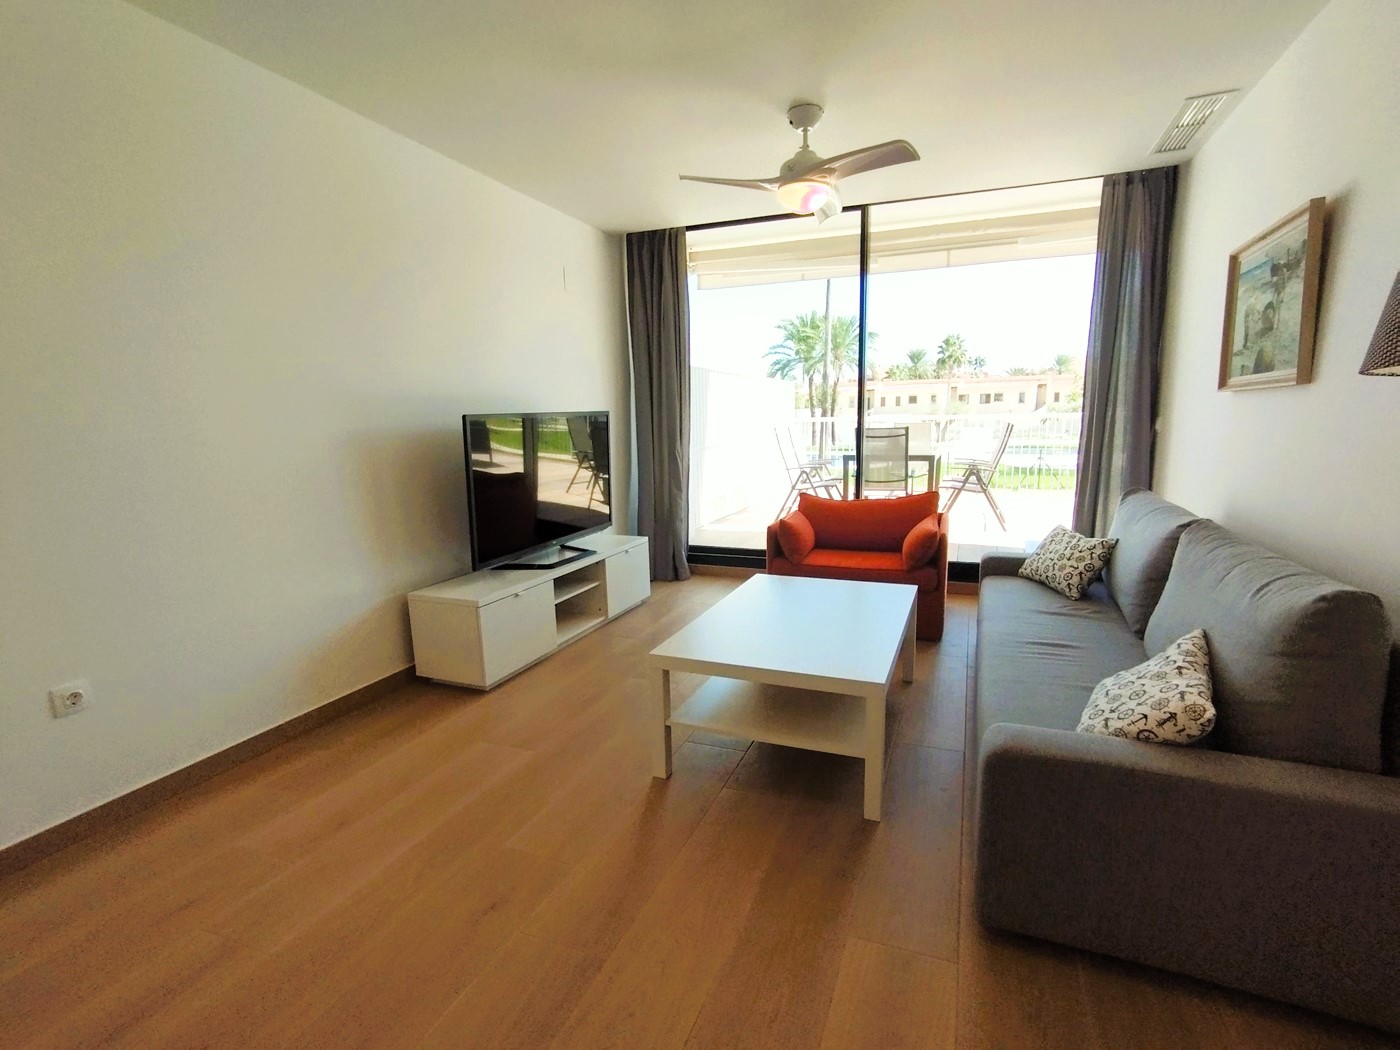 Ground Floor for sale on the first line in Denia